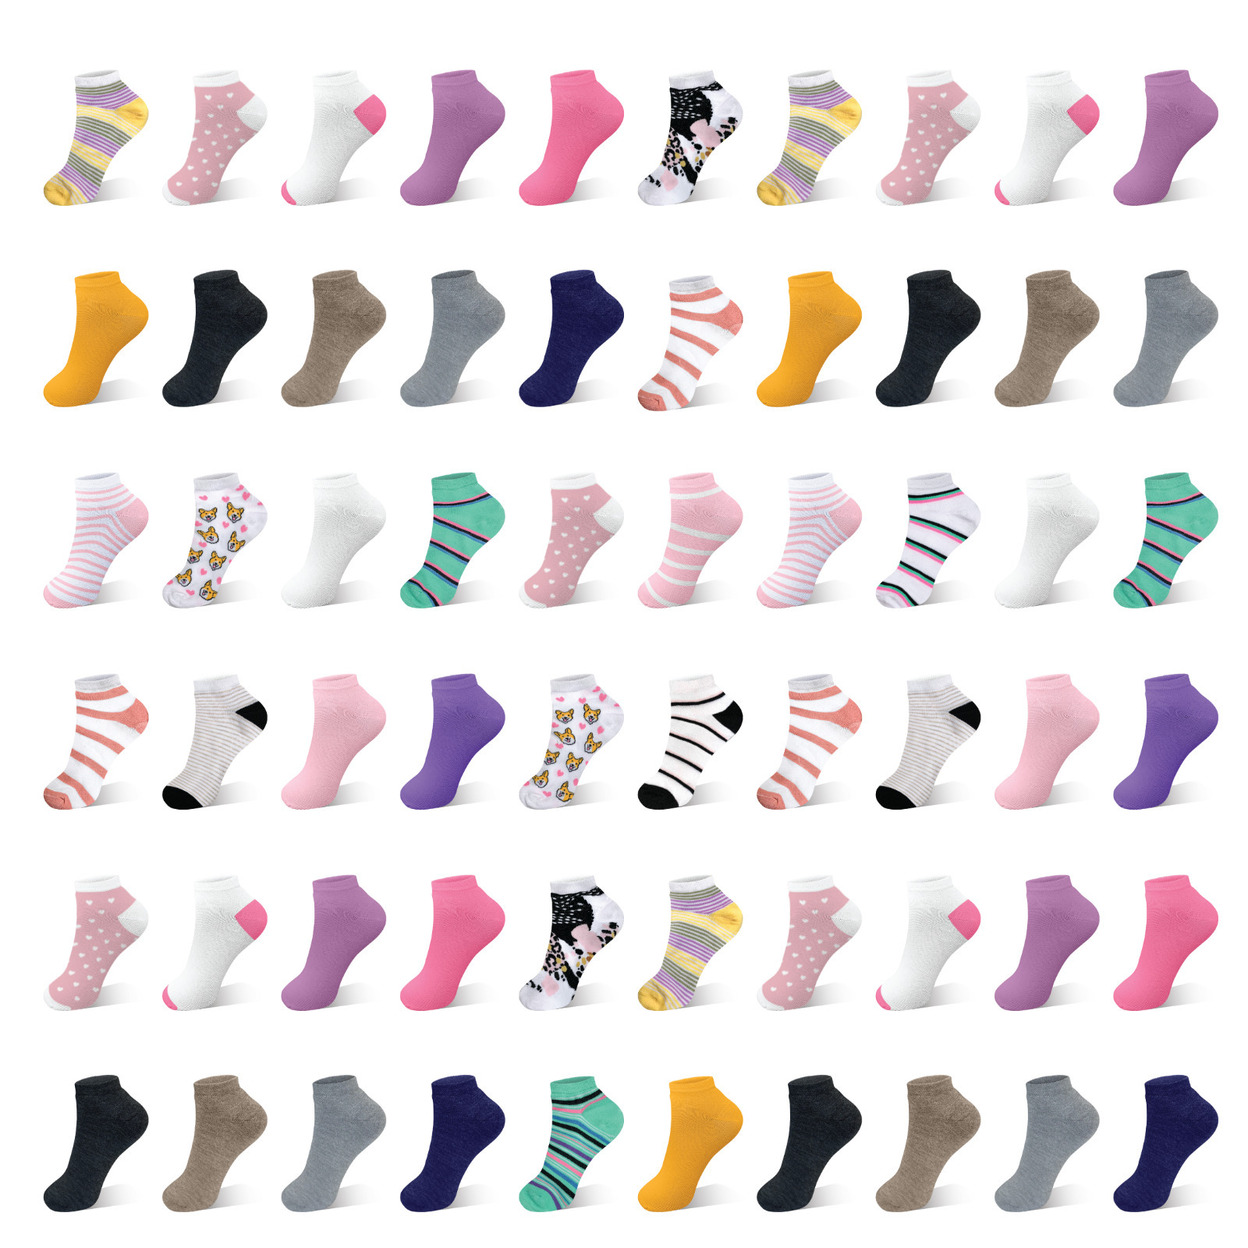 Multi-Pairs: Women’s Breathable Fun-Funky Colorful No Show Low Cut Ankle Socks - 10-pairs